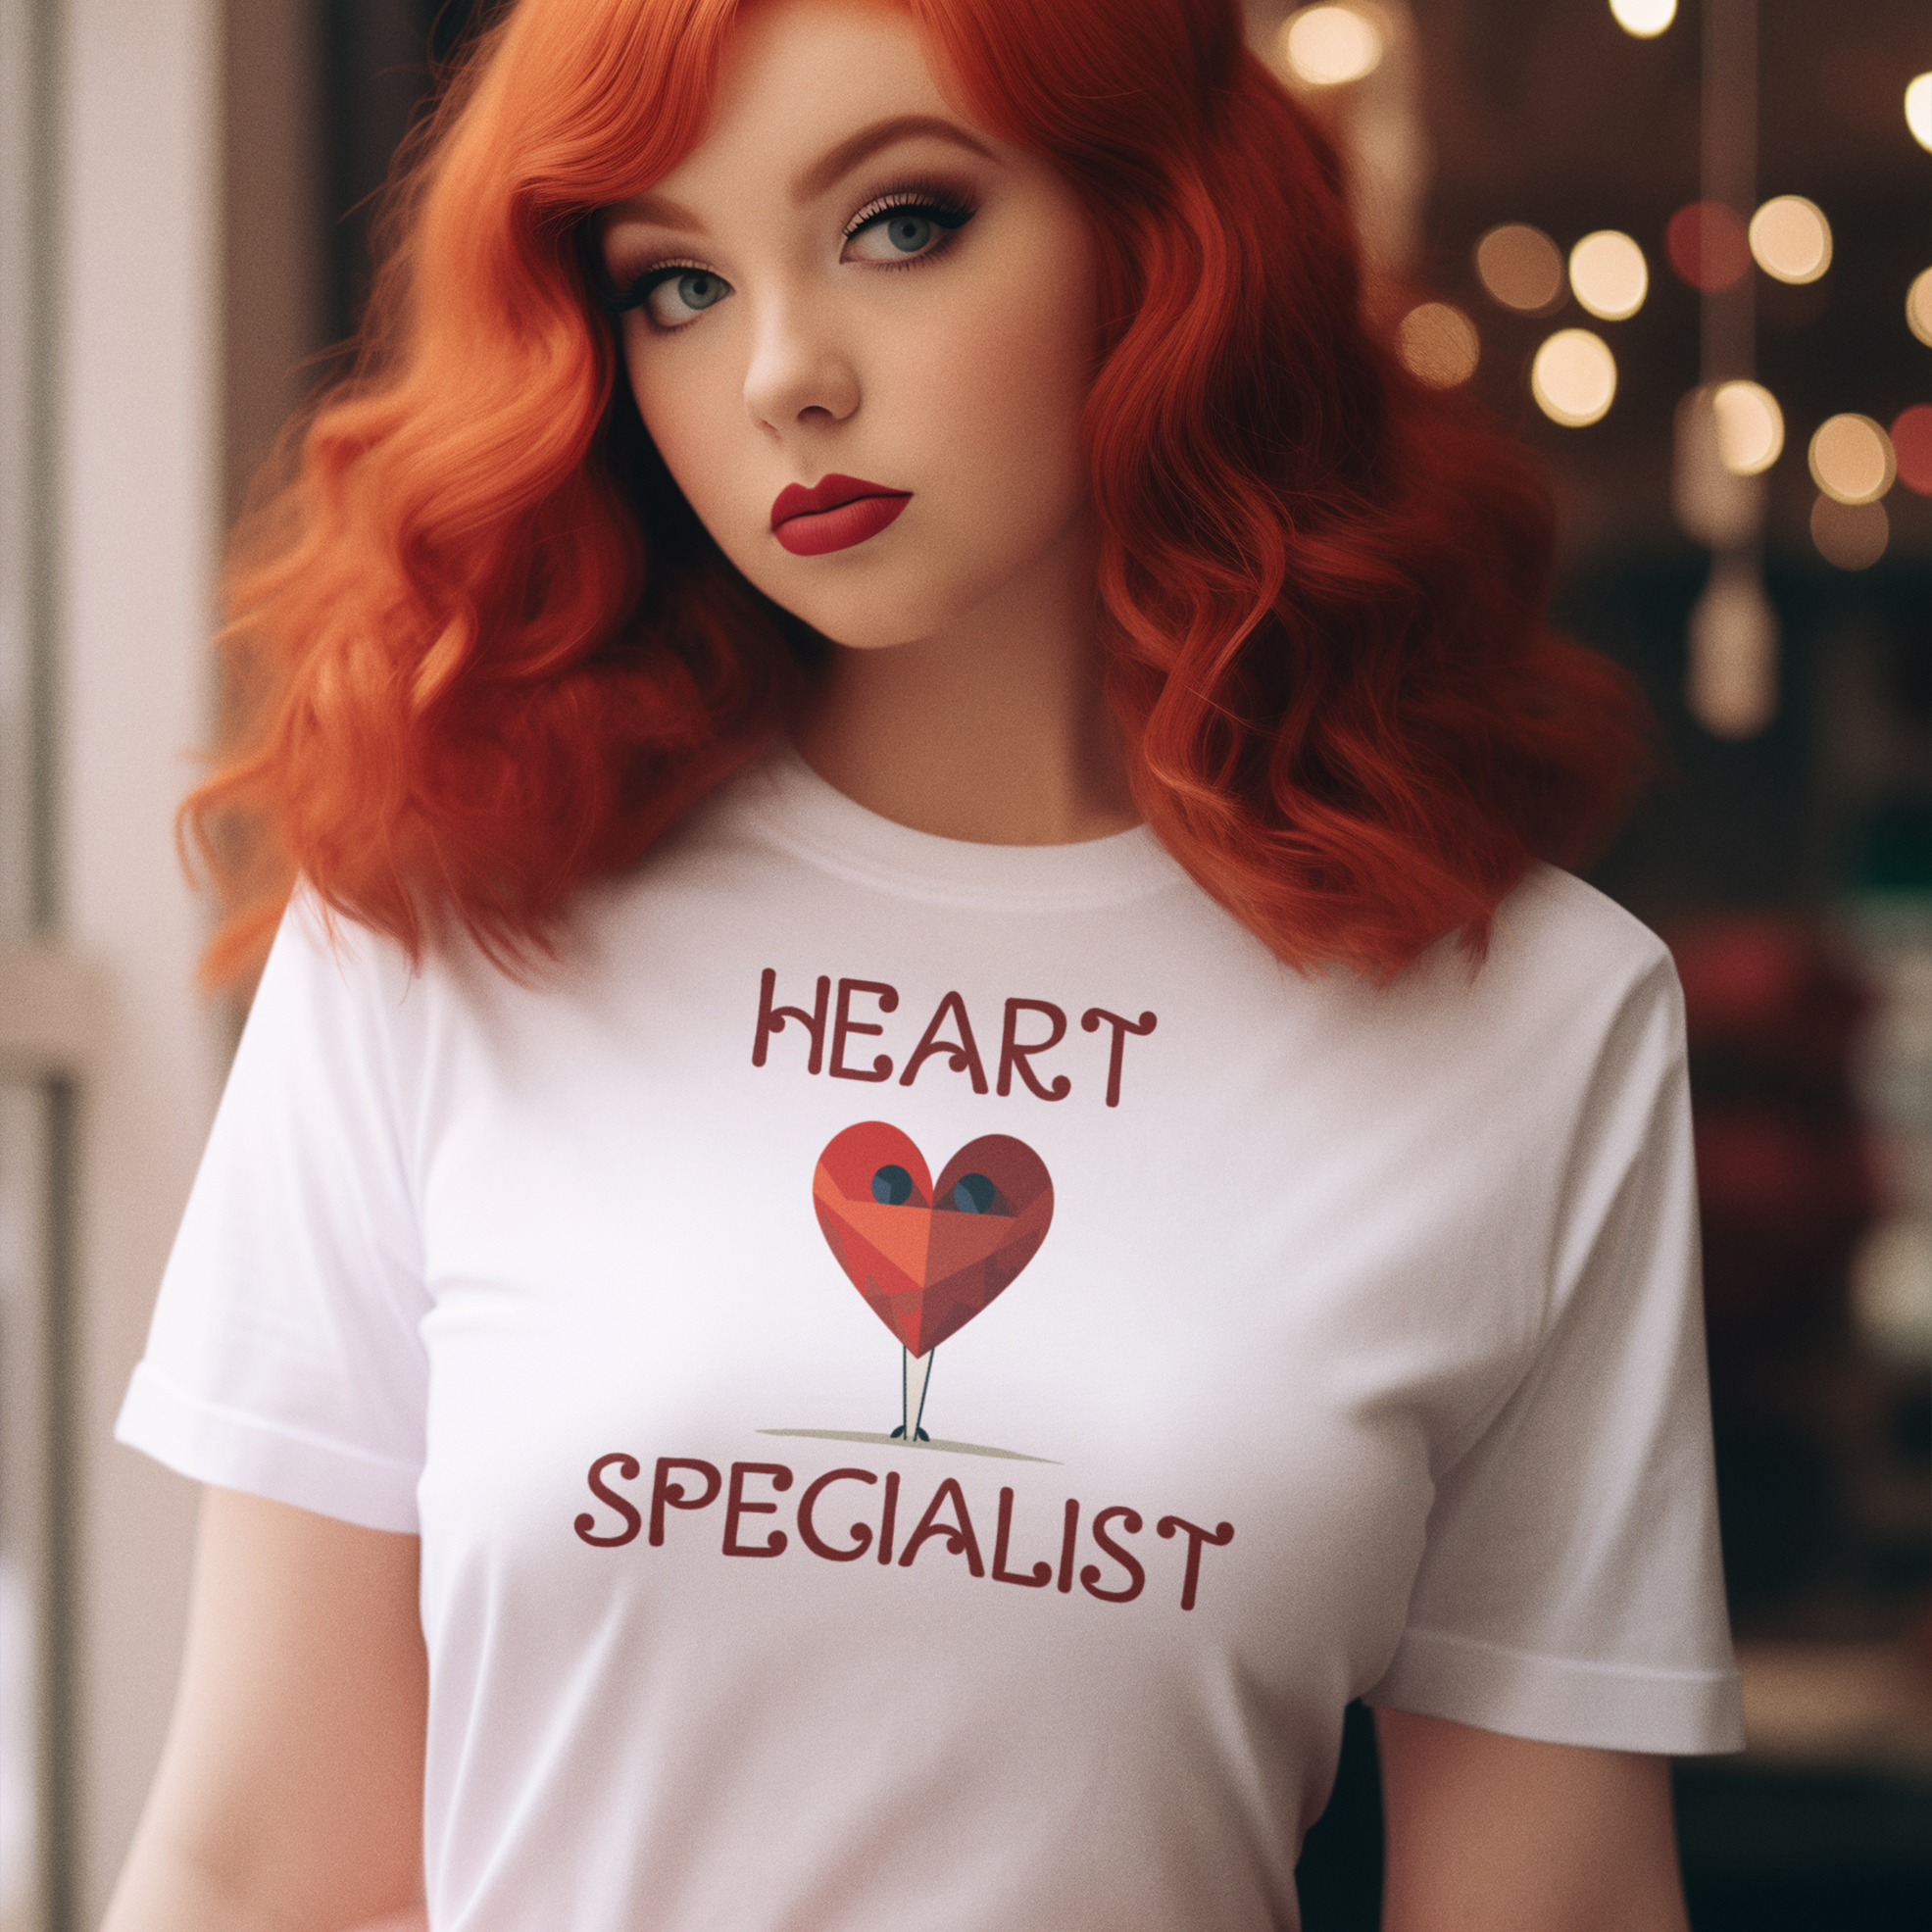 Heart Specialist Women's T-Shirt for the Heart-Centric Fashionista